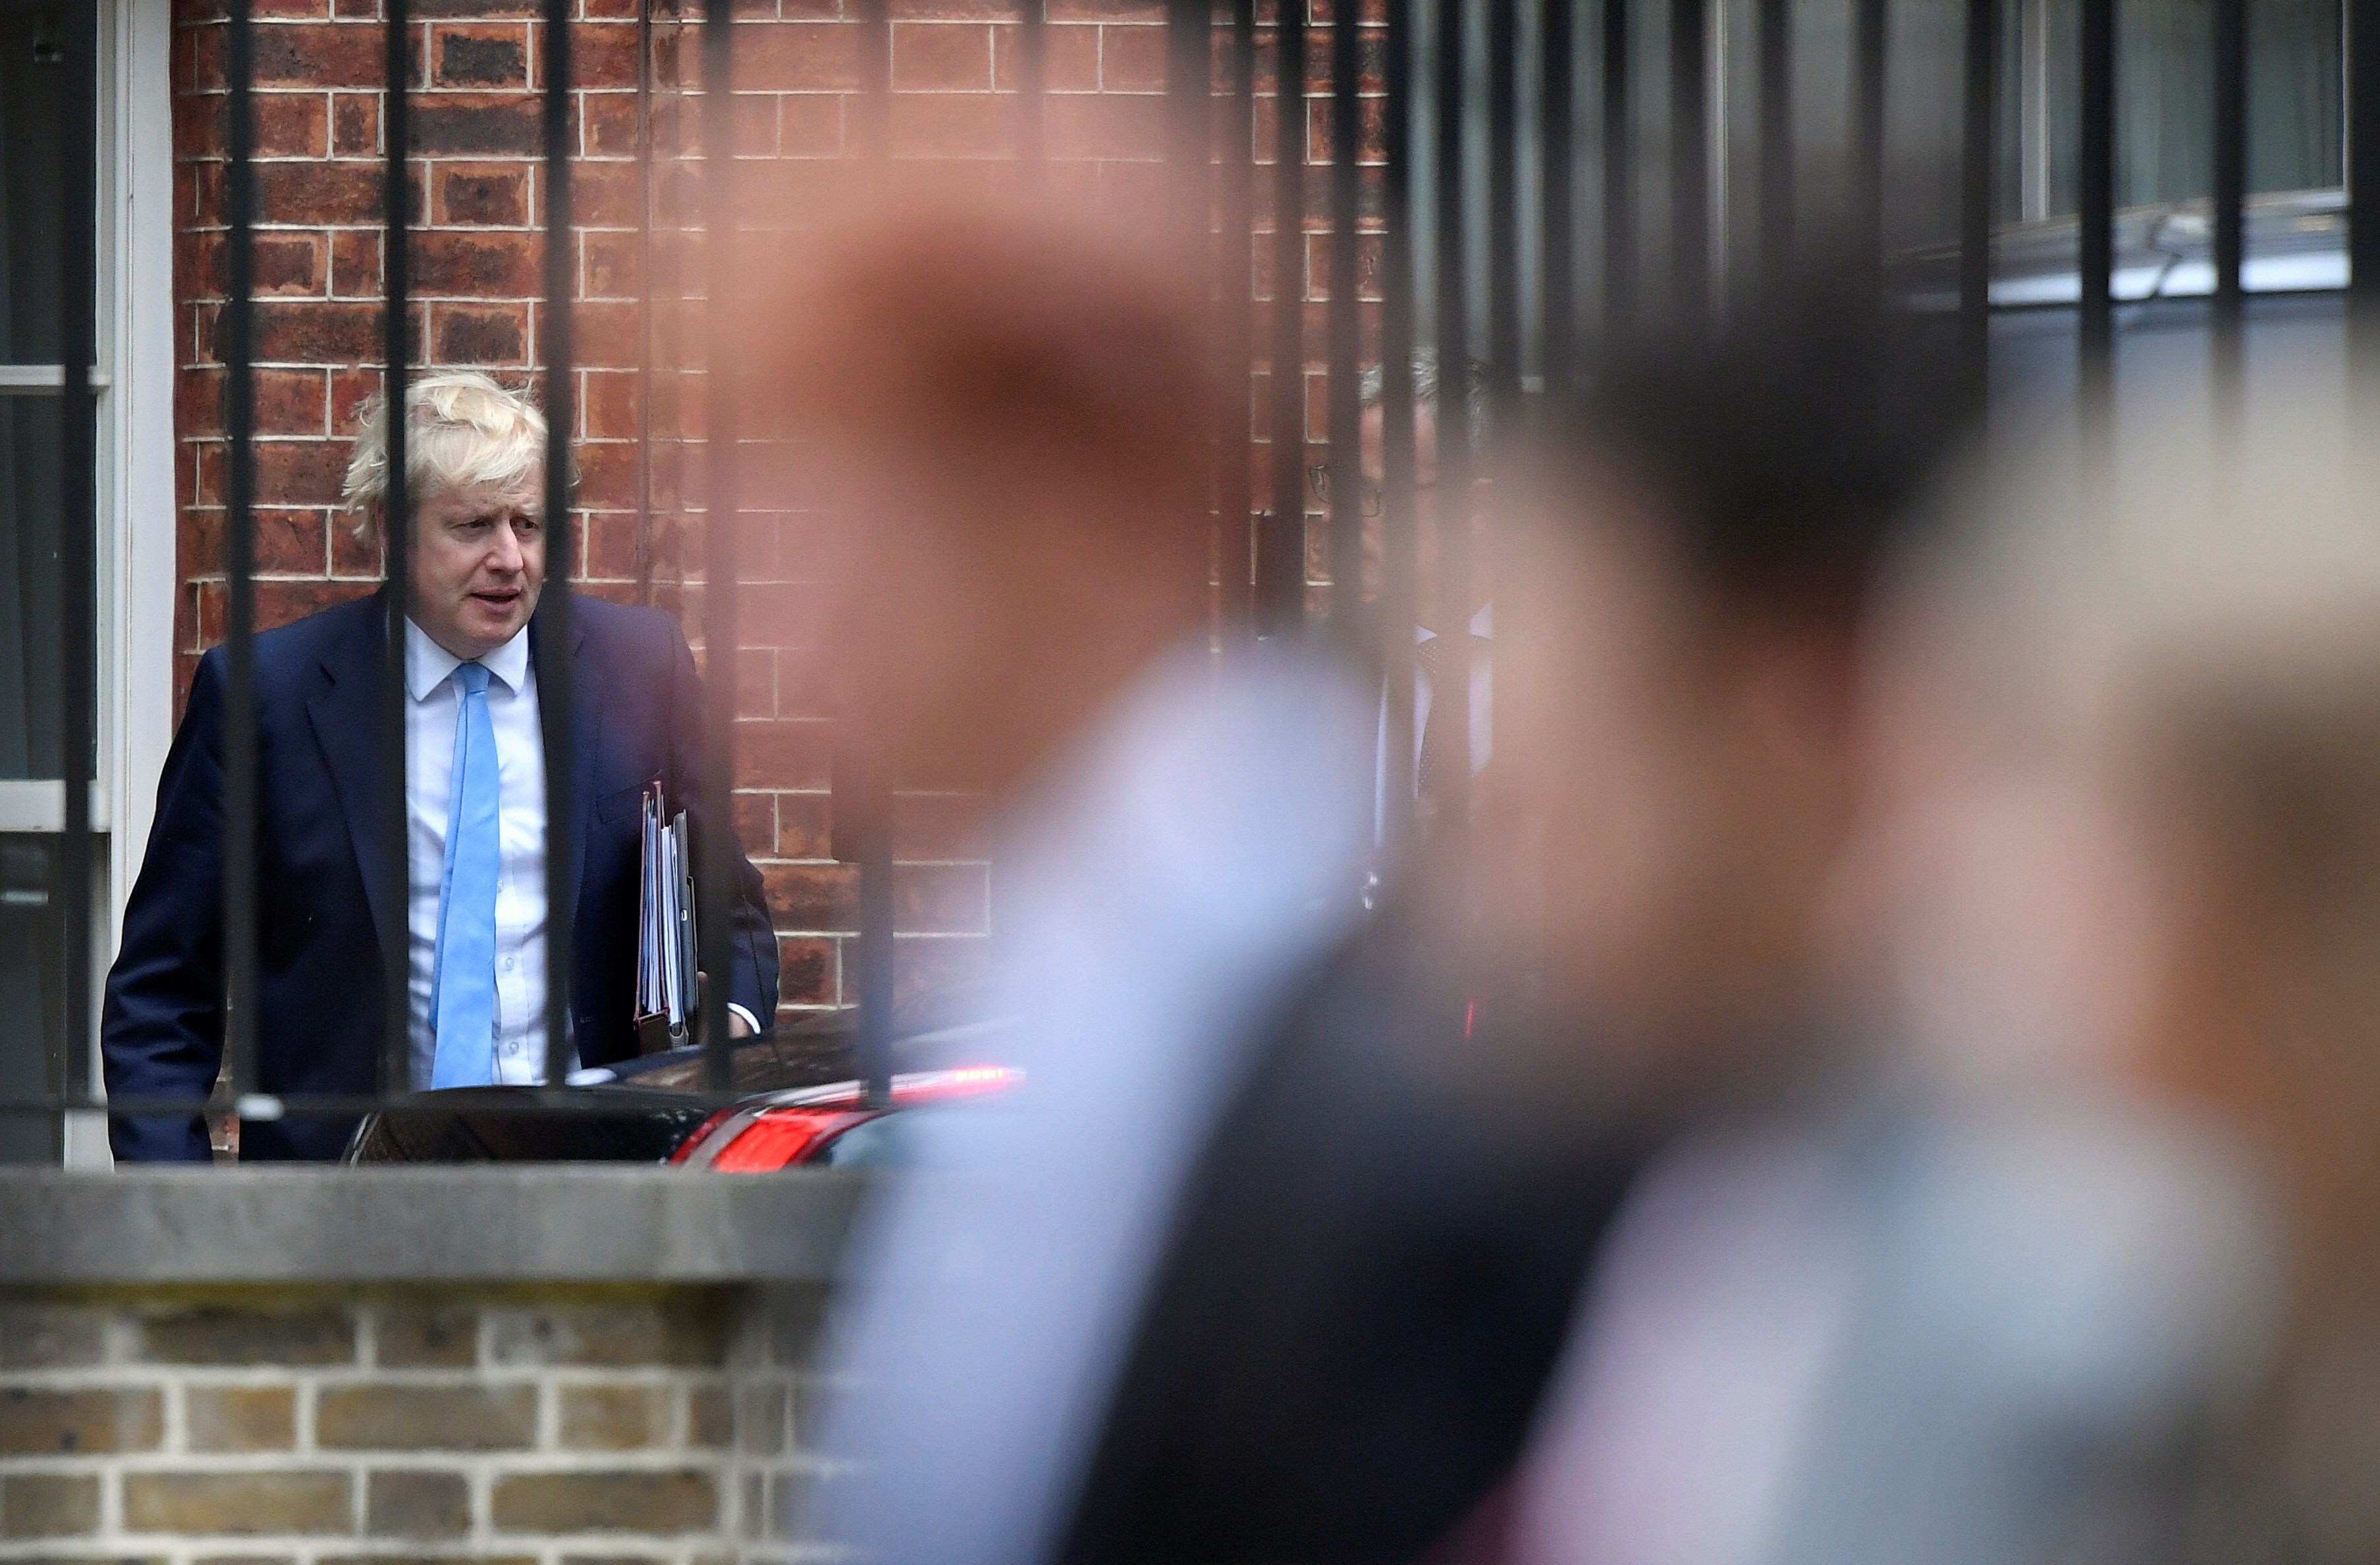 Britain's Prime Minister Boris Johnson leaves Downing Street from the rear entrance door, in London, Britain on 9 September (Reuters)